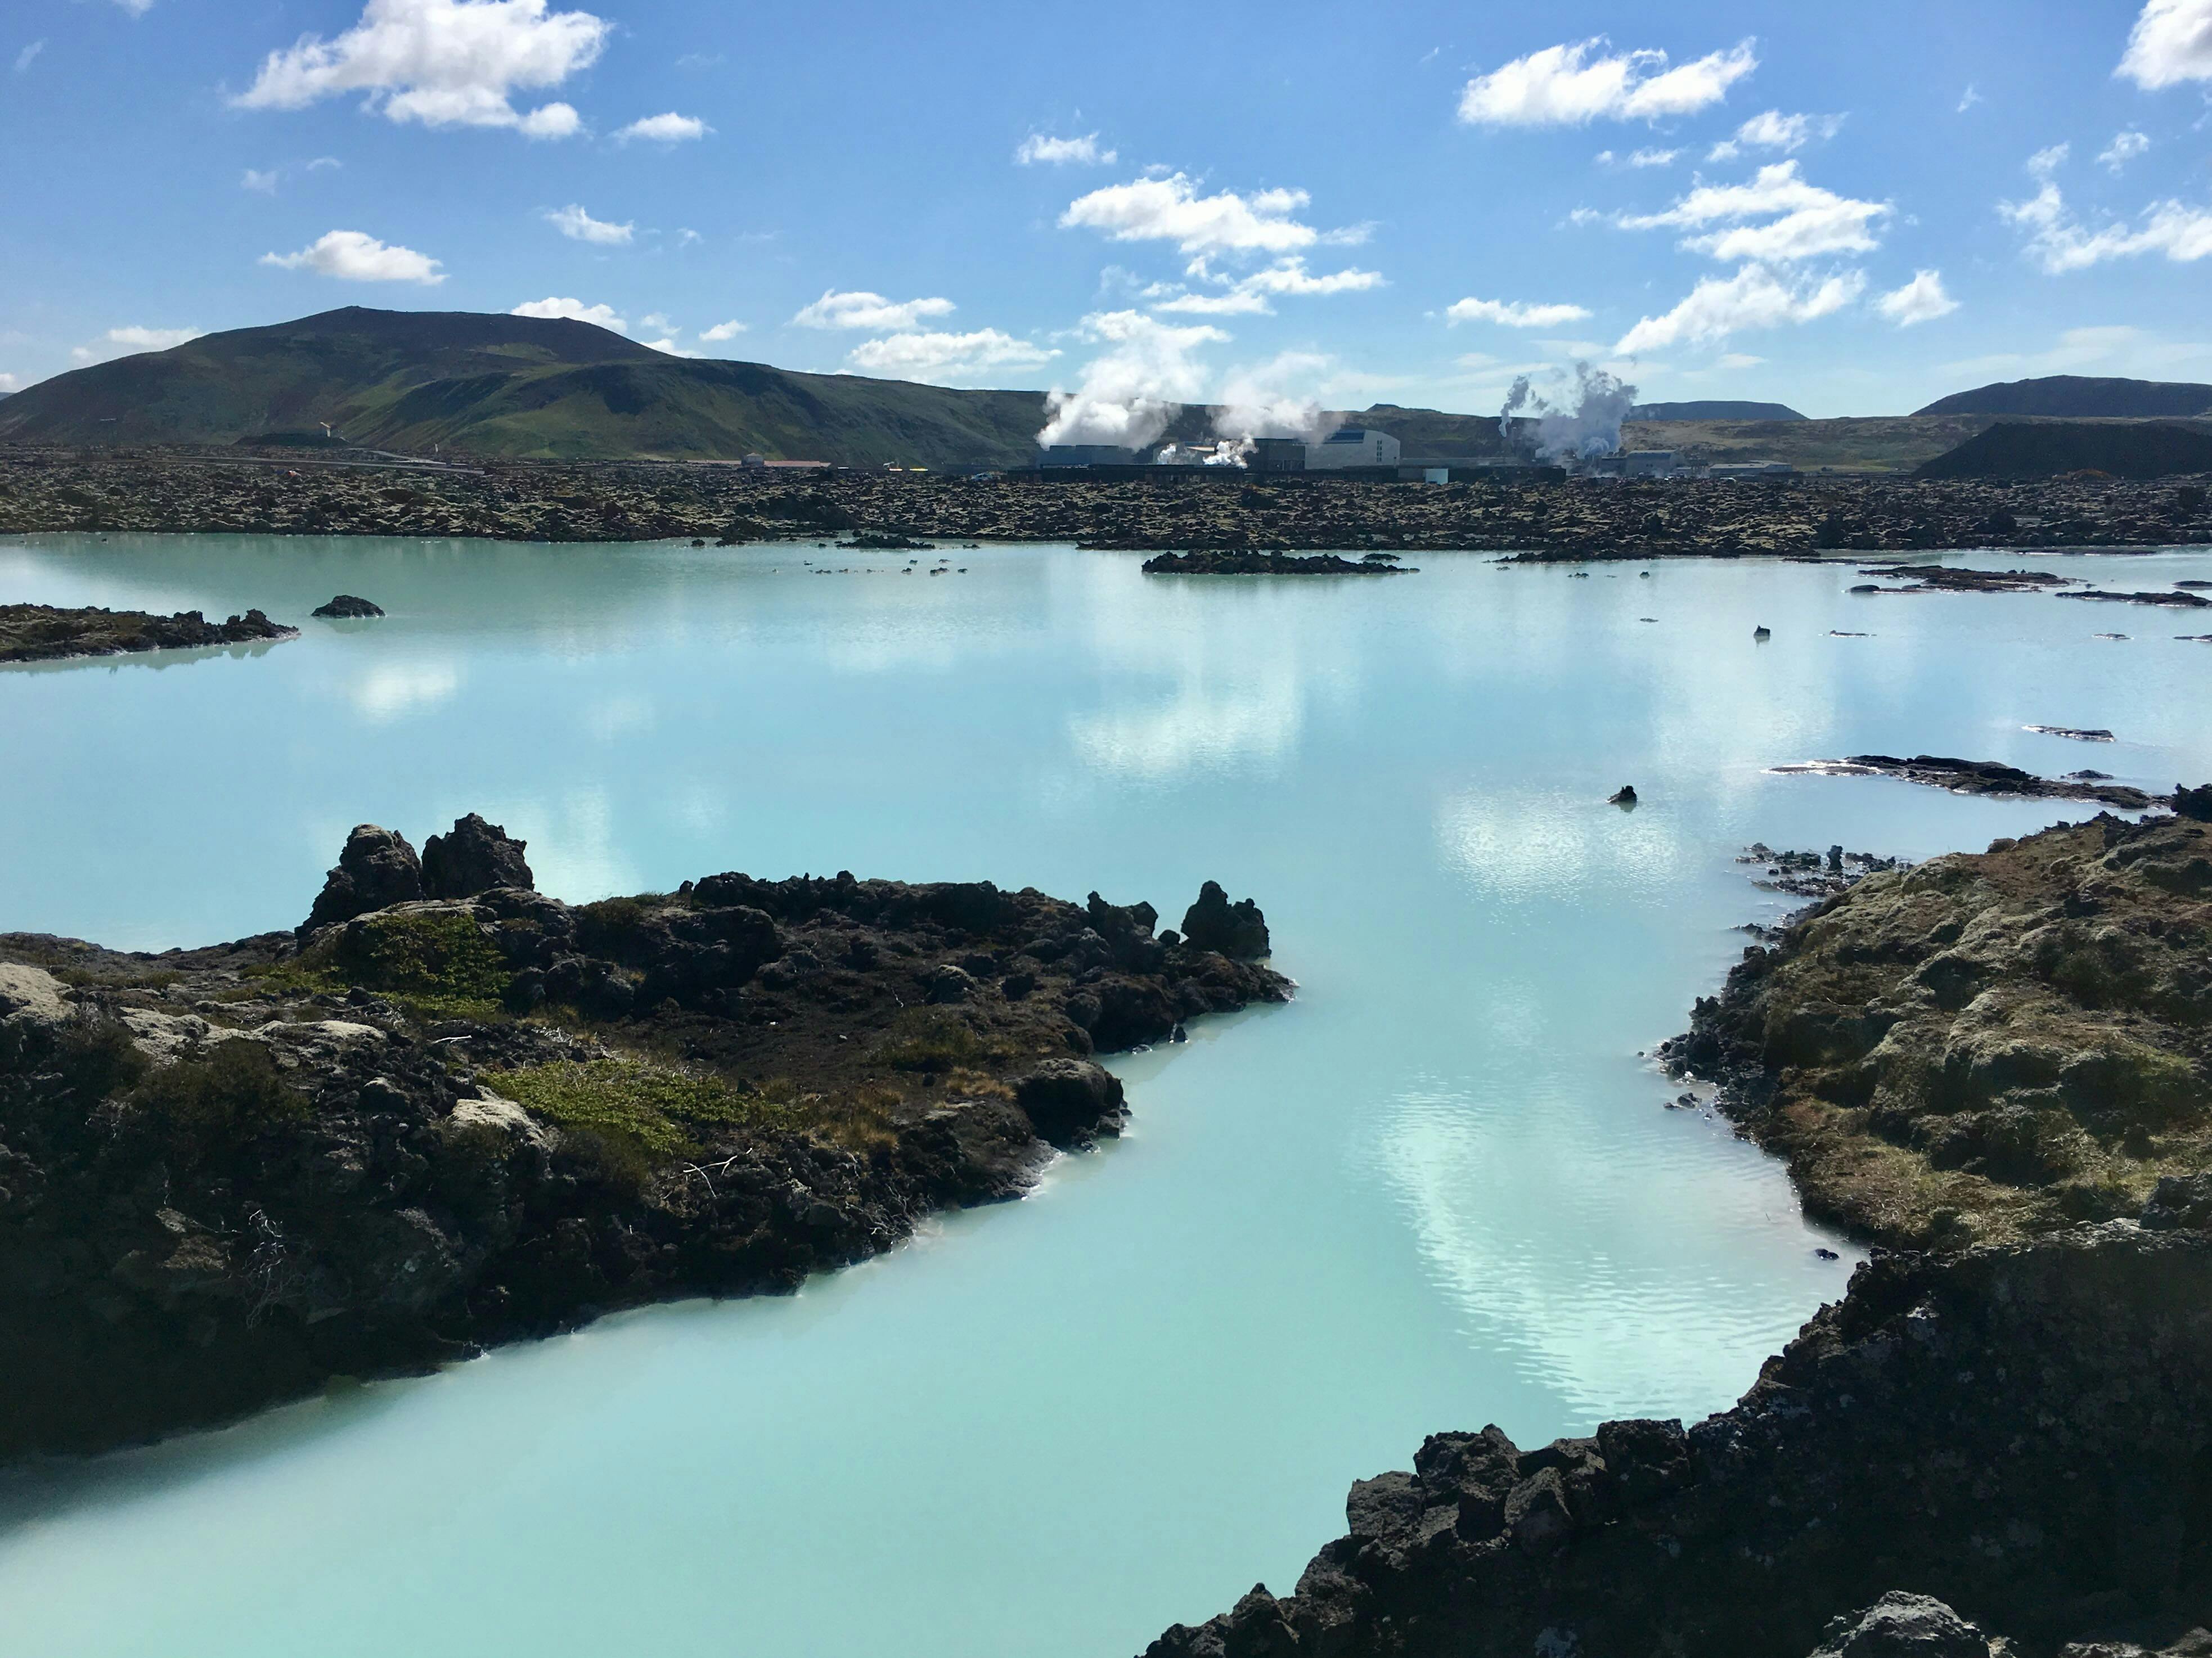 how to travel to iceland from europe